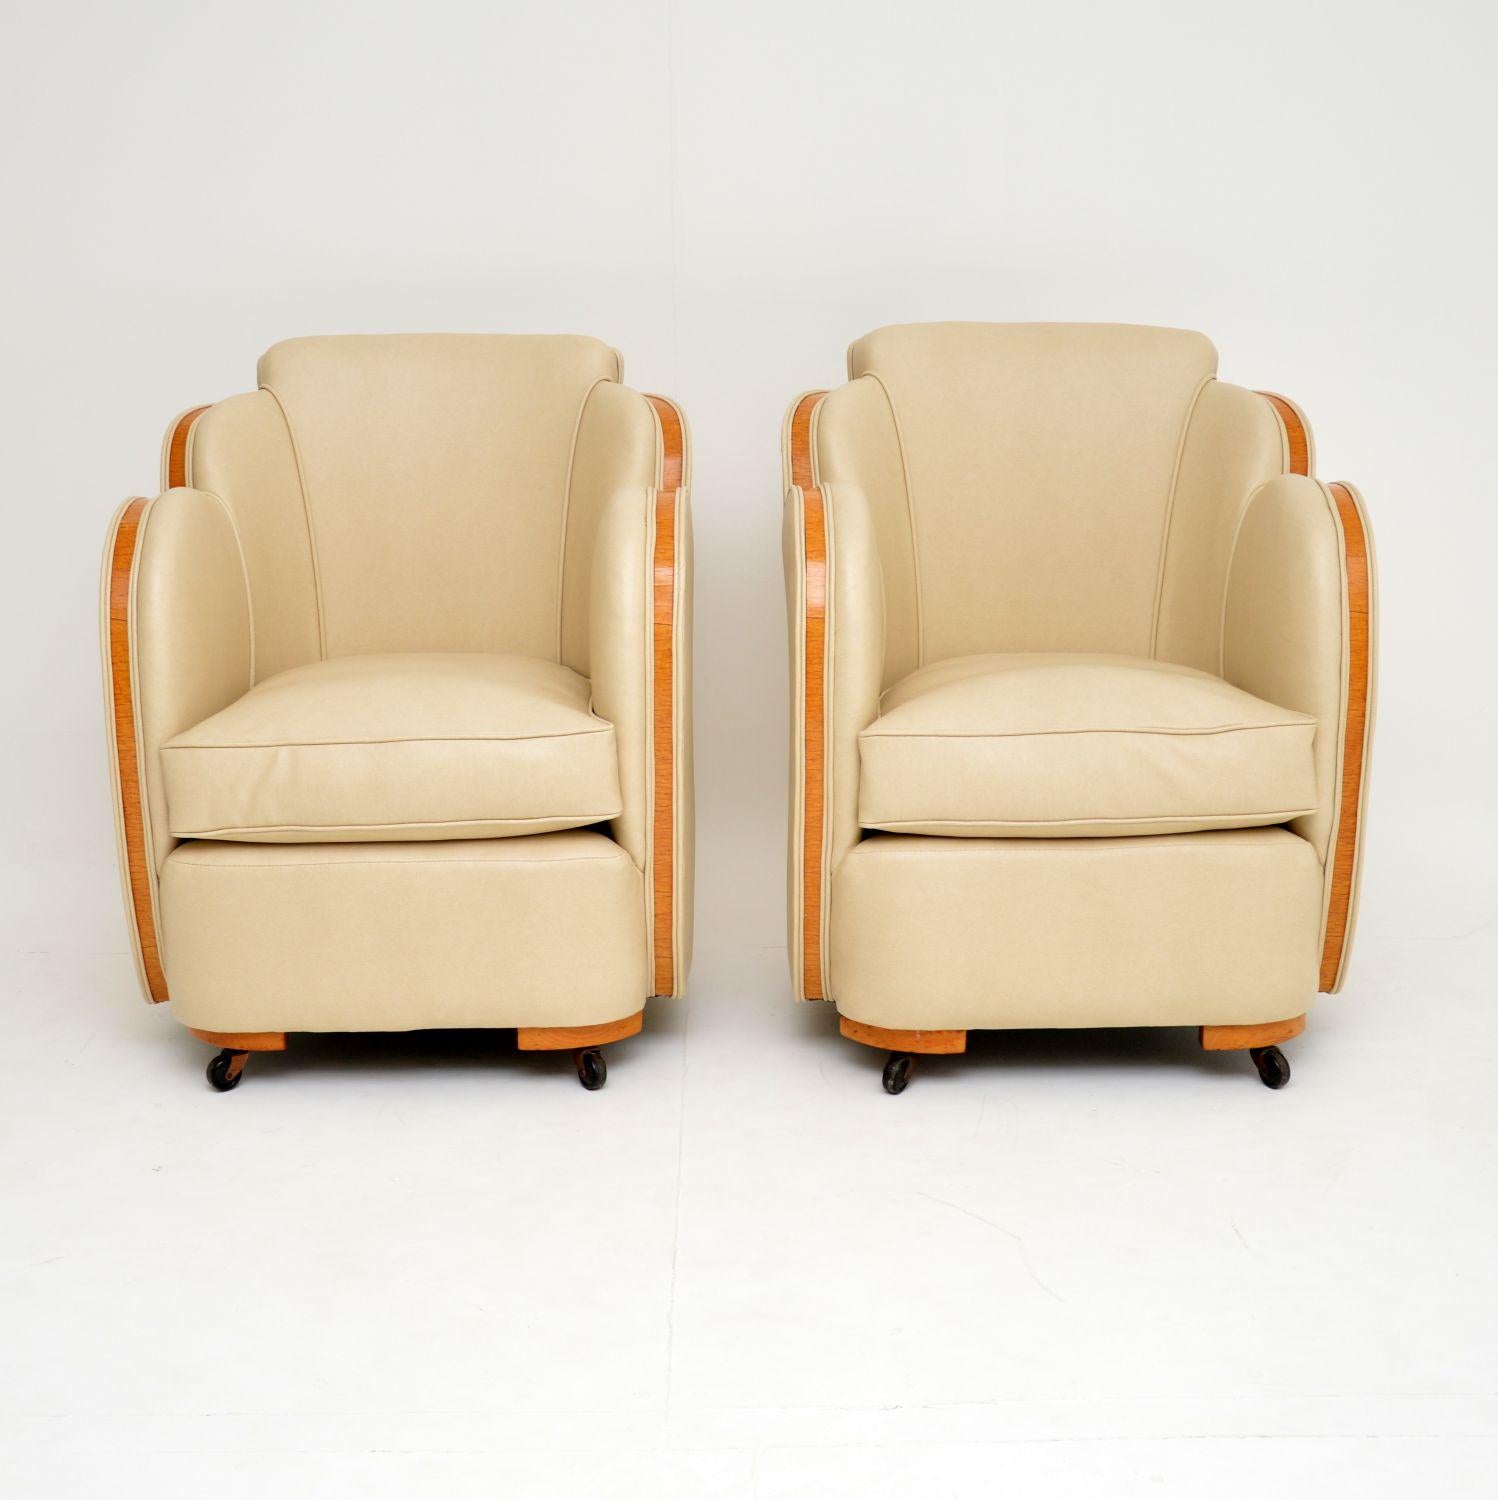 A stunning and very rare pair of vintage Art Deco period cloud back armchairs. These were made by Harry & Lou Epstein, they date from the 1920-30’s. They have beautiful burr maple banding all around the frames, up the arms, across the backs and on